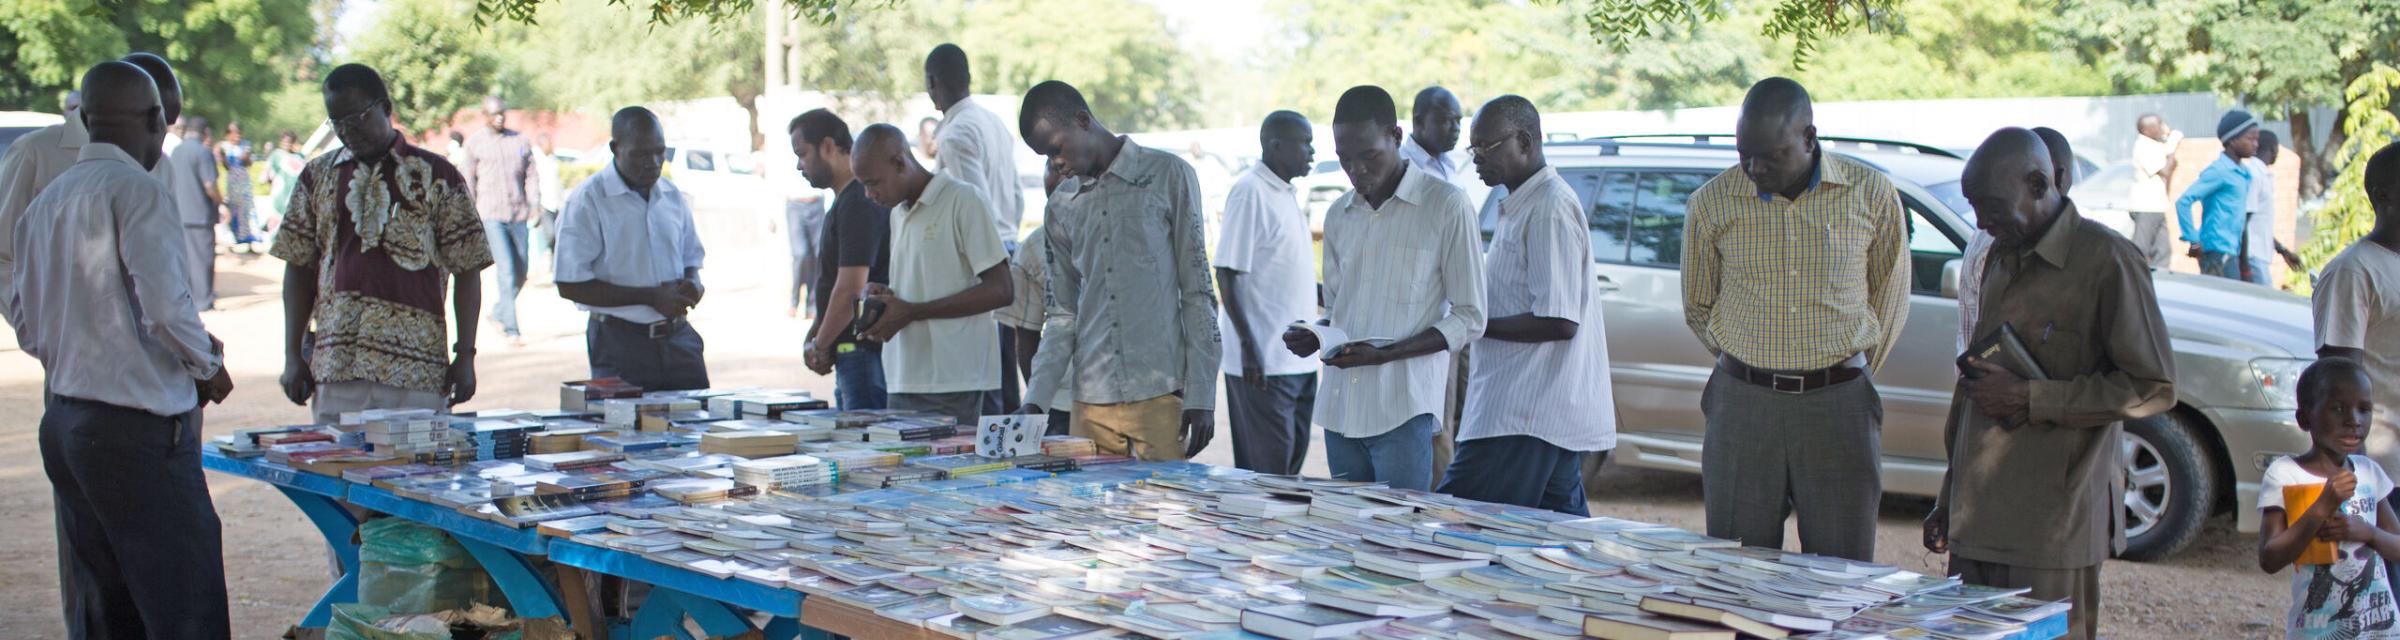 OM South Sudan sells Christian books at book tables at churches and special events.  
Photo by Justin Lovett